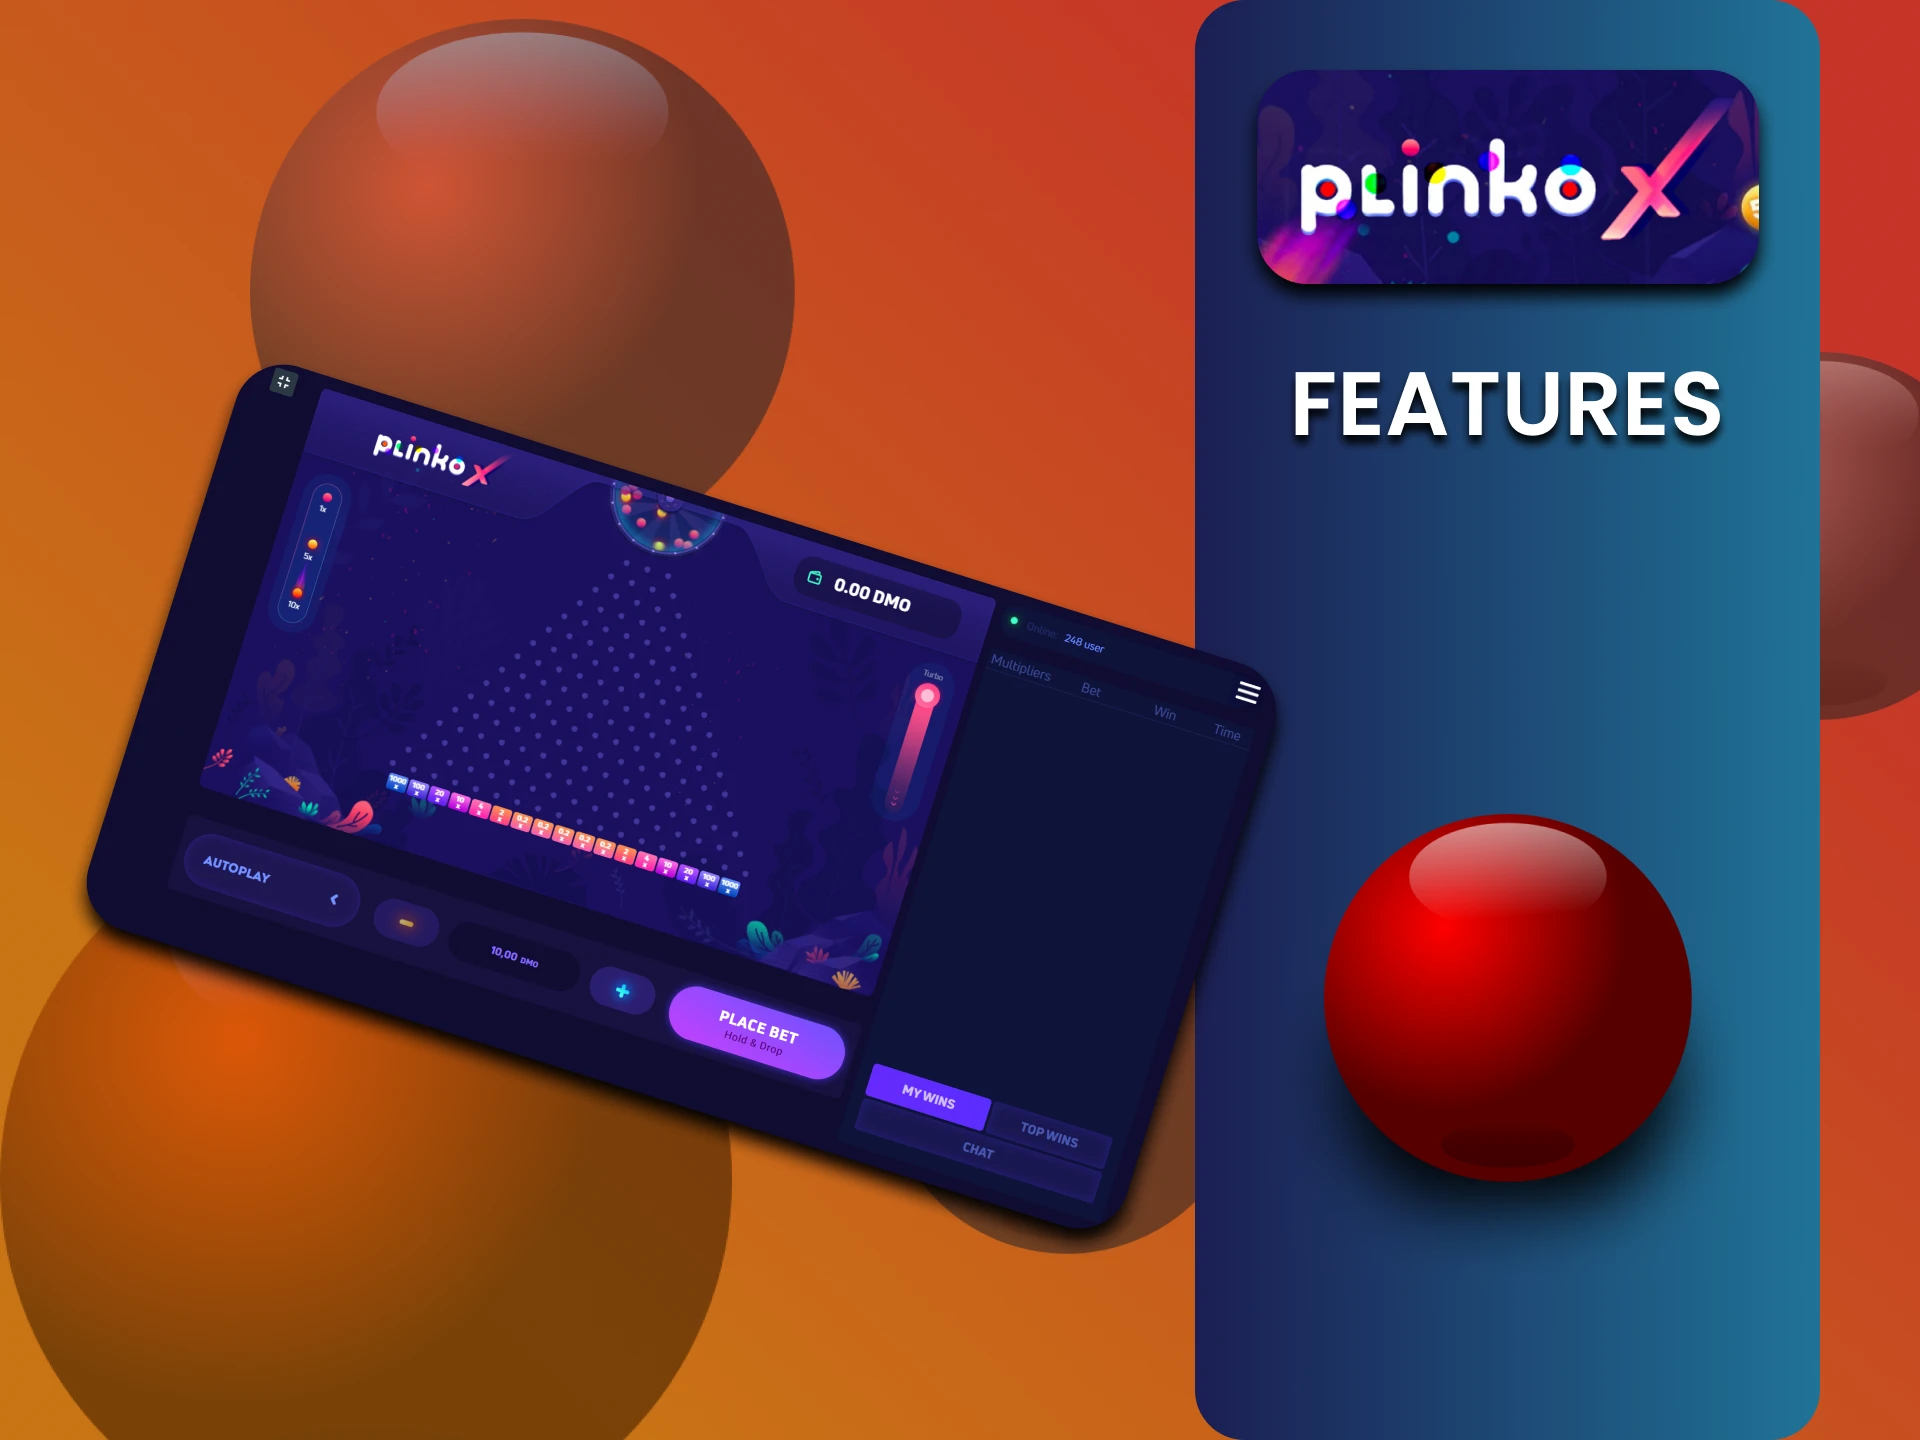 Find out how the Plinko X game works.